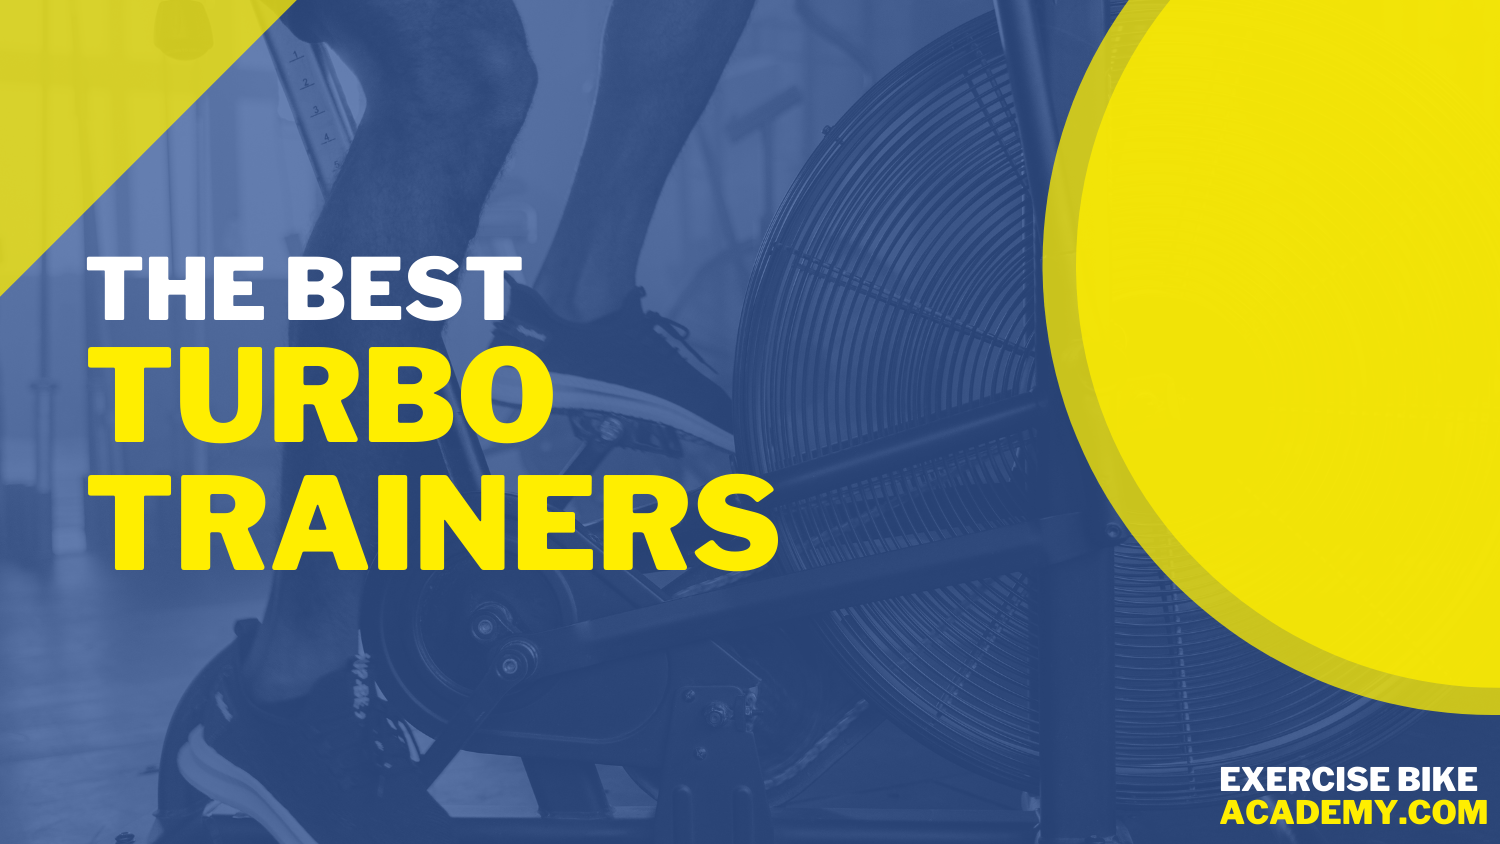 5 of the Best Turbo Trainers on the Market